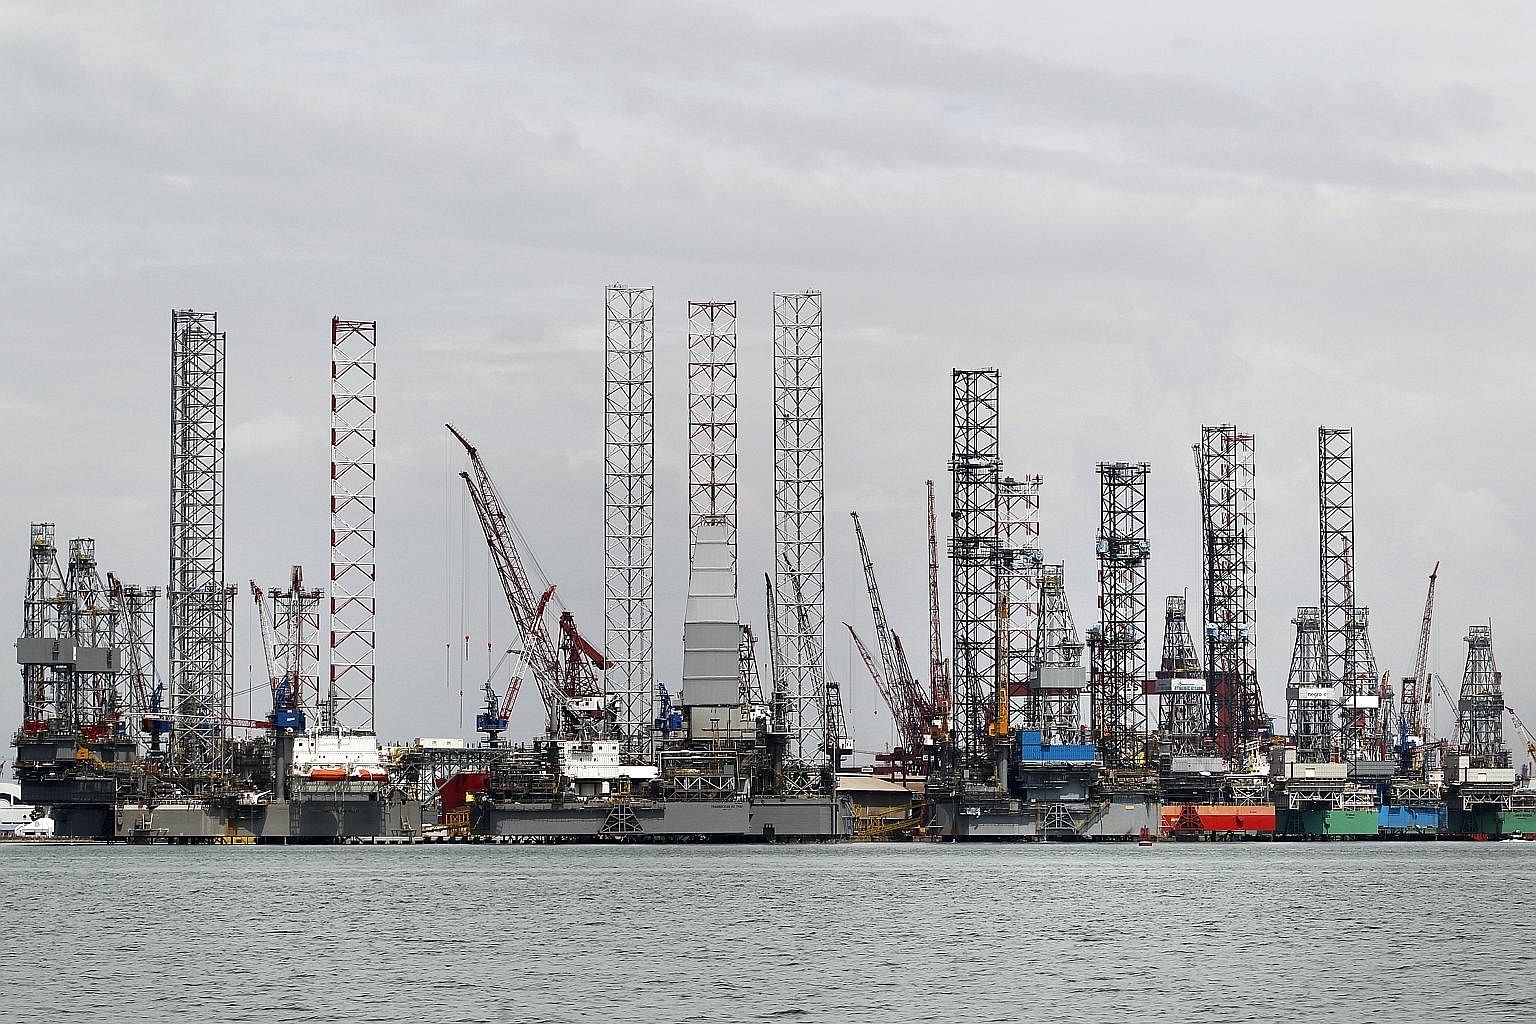 Singapore shipyards probably pay the highest price in the world for the land they occupy. JTC could explore building floating platforms for shipyard operations in the face of the prohibitive cost of reclaiming land.